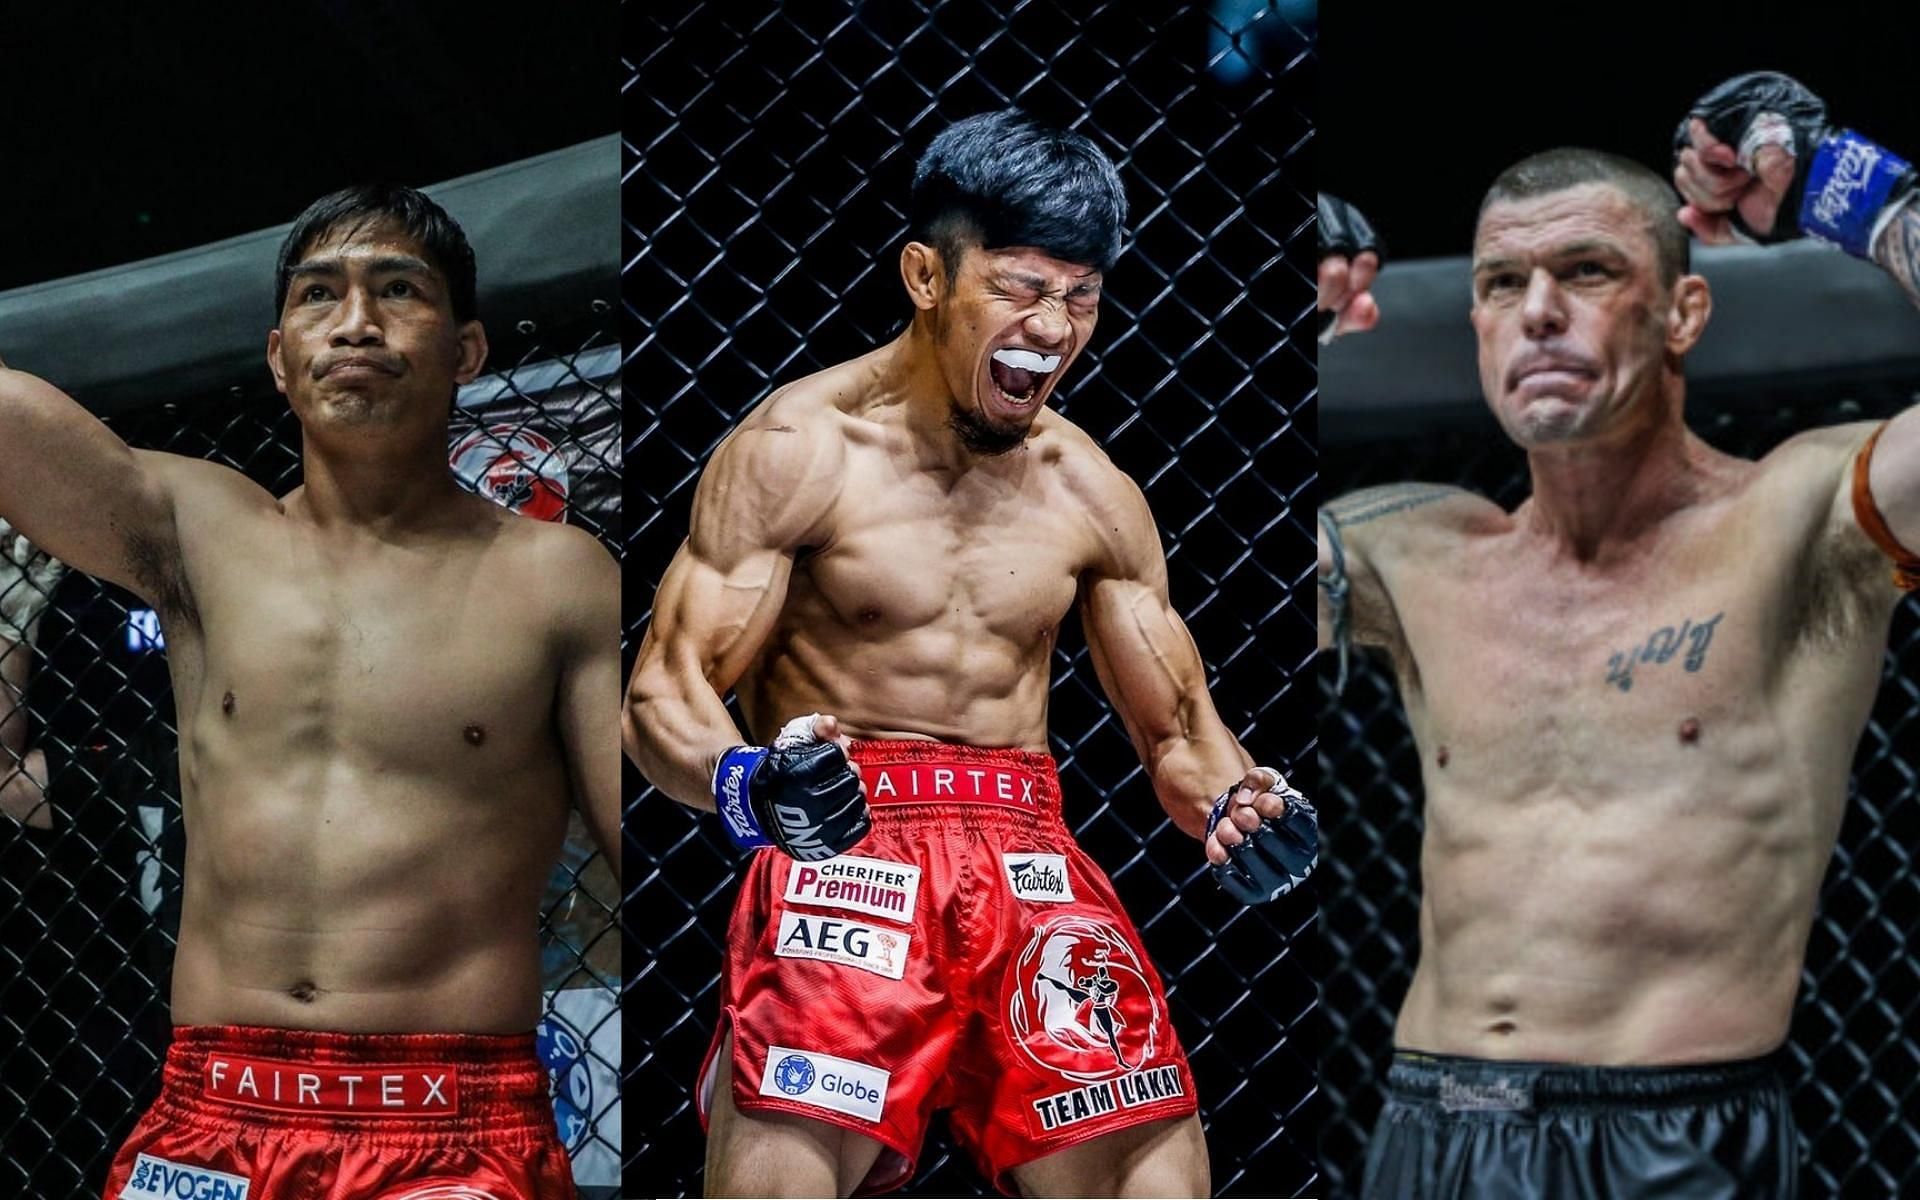 Lito Adiwang (middle) provided some insights about the fight between his teammate, Eduard Folayang (left) and John Wayne Parr (right) at ONE: X. (Images courtesy of ONE Championship)